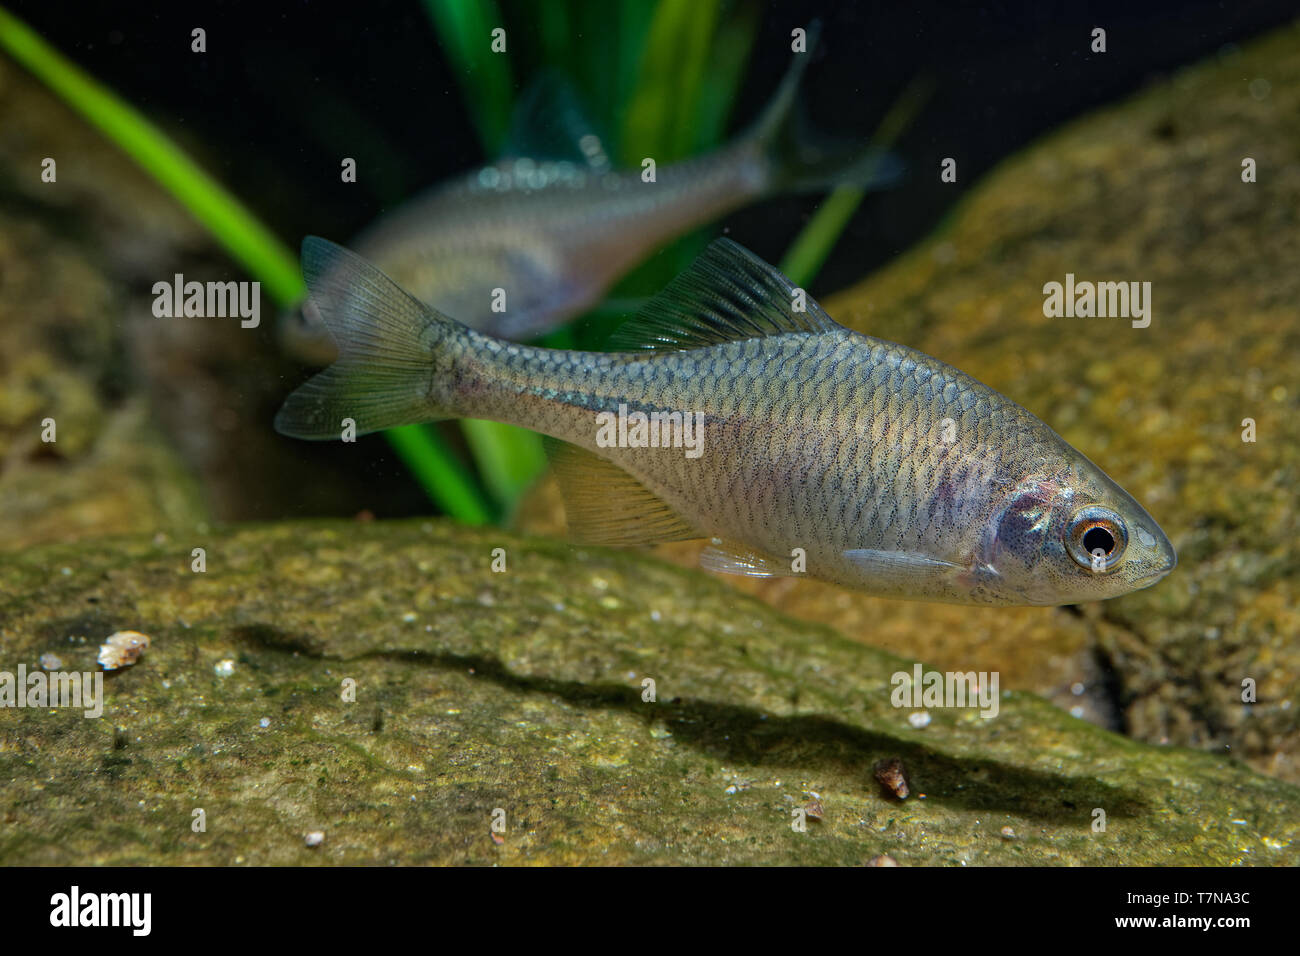 Amur Bitterling - Rhodeus sericeus small fish of the carp family. Mussels form an essential part of its reproductive system, with bitterling eggs bein Stock Photo